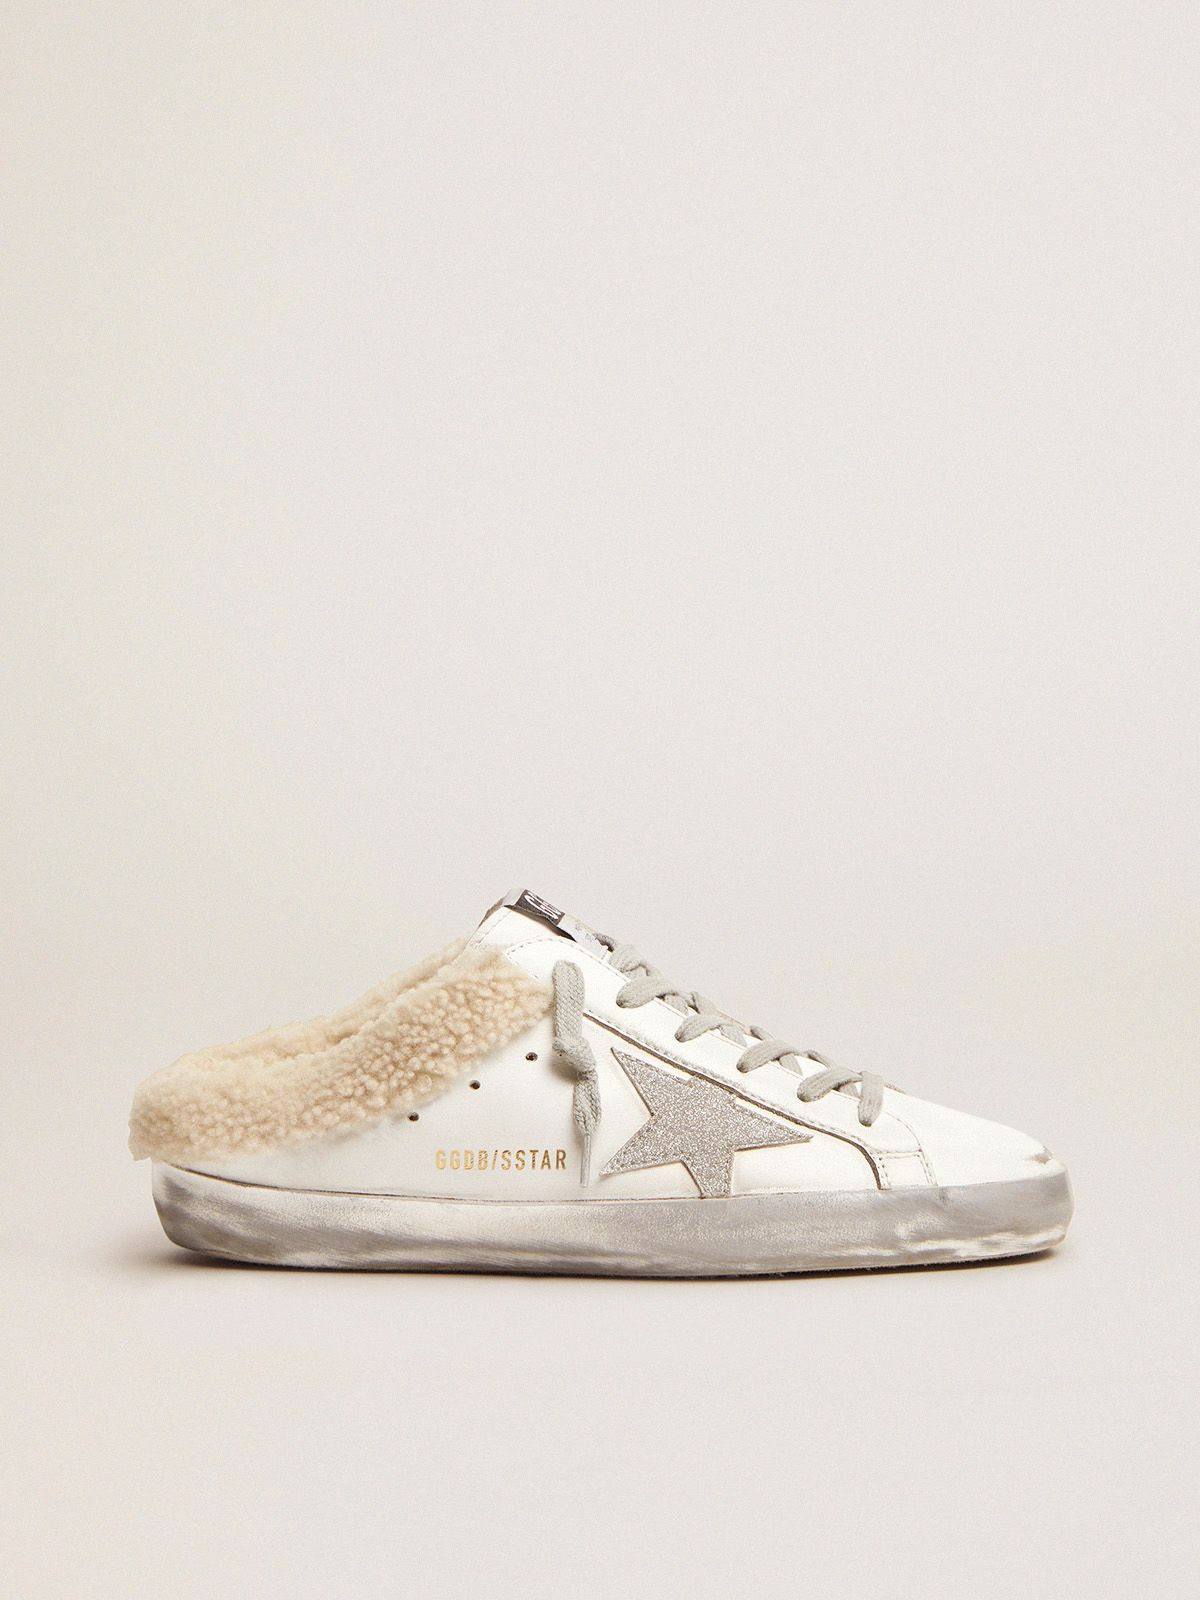 Golden Goose Stardan Super-Star Sabots in white leather with shearling lining